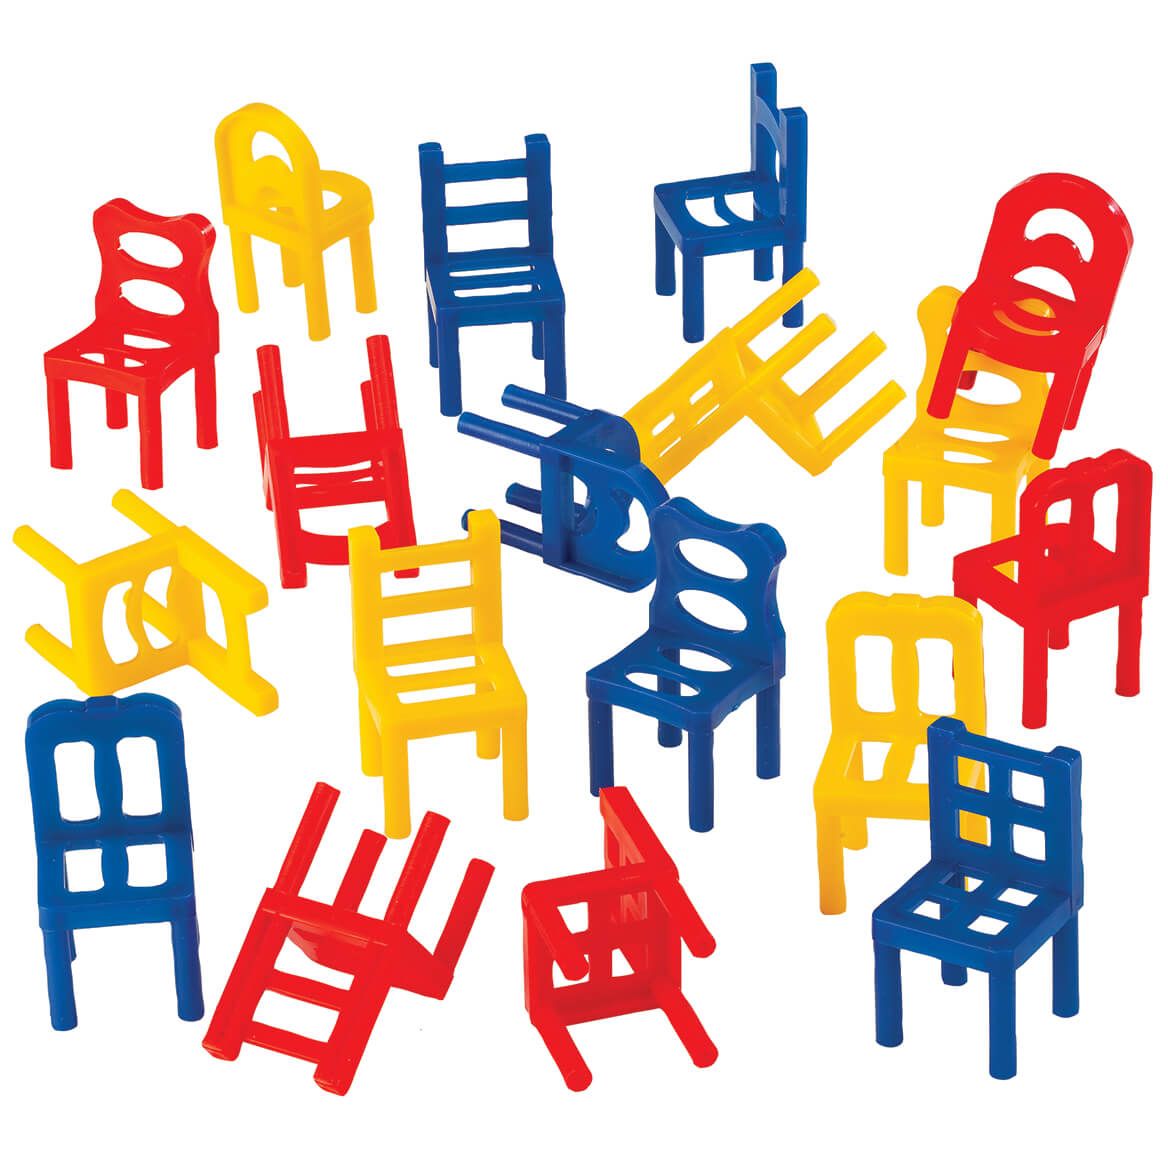 Chair Stacking Game + '-' + 374837